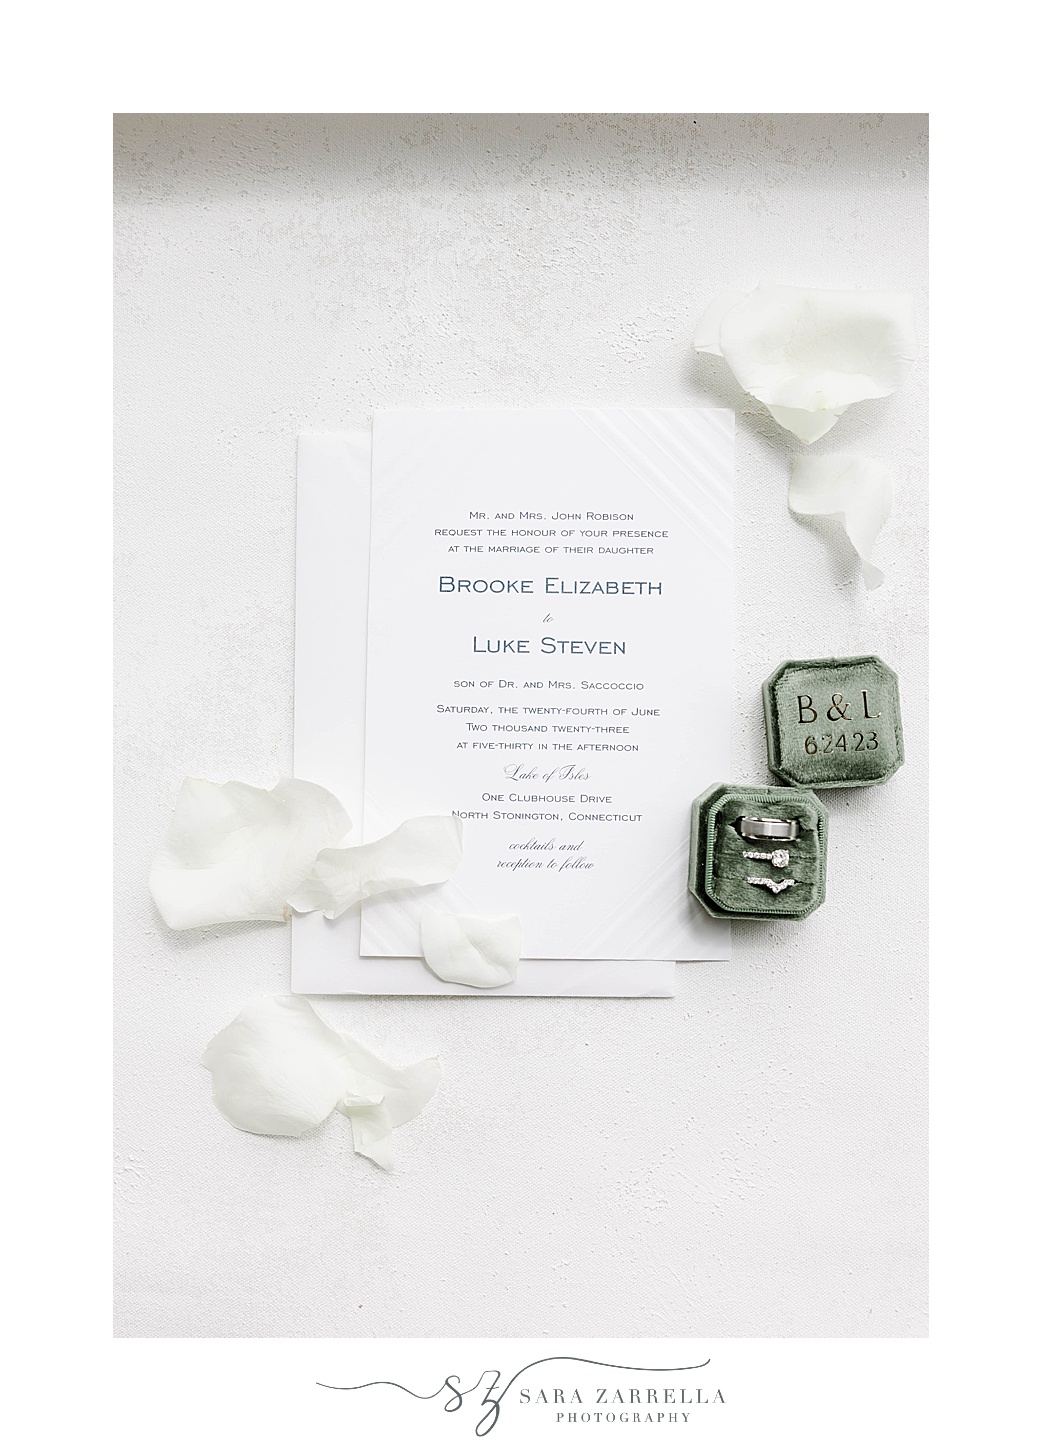 stationery set with green ring box for Lake of Isles wedding